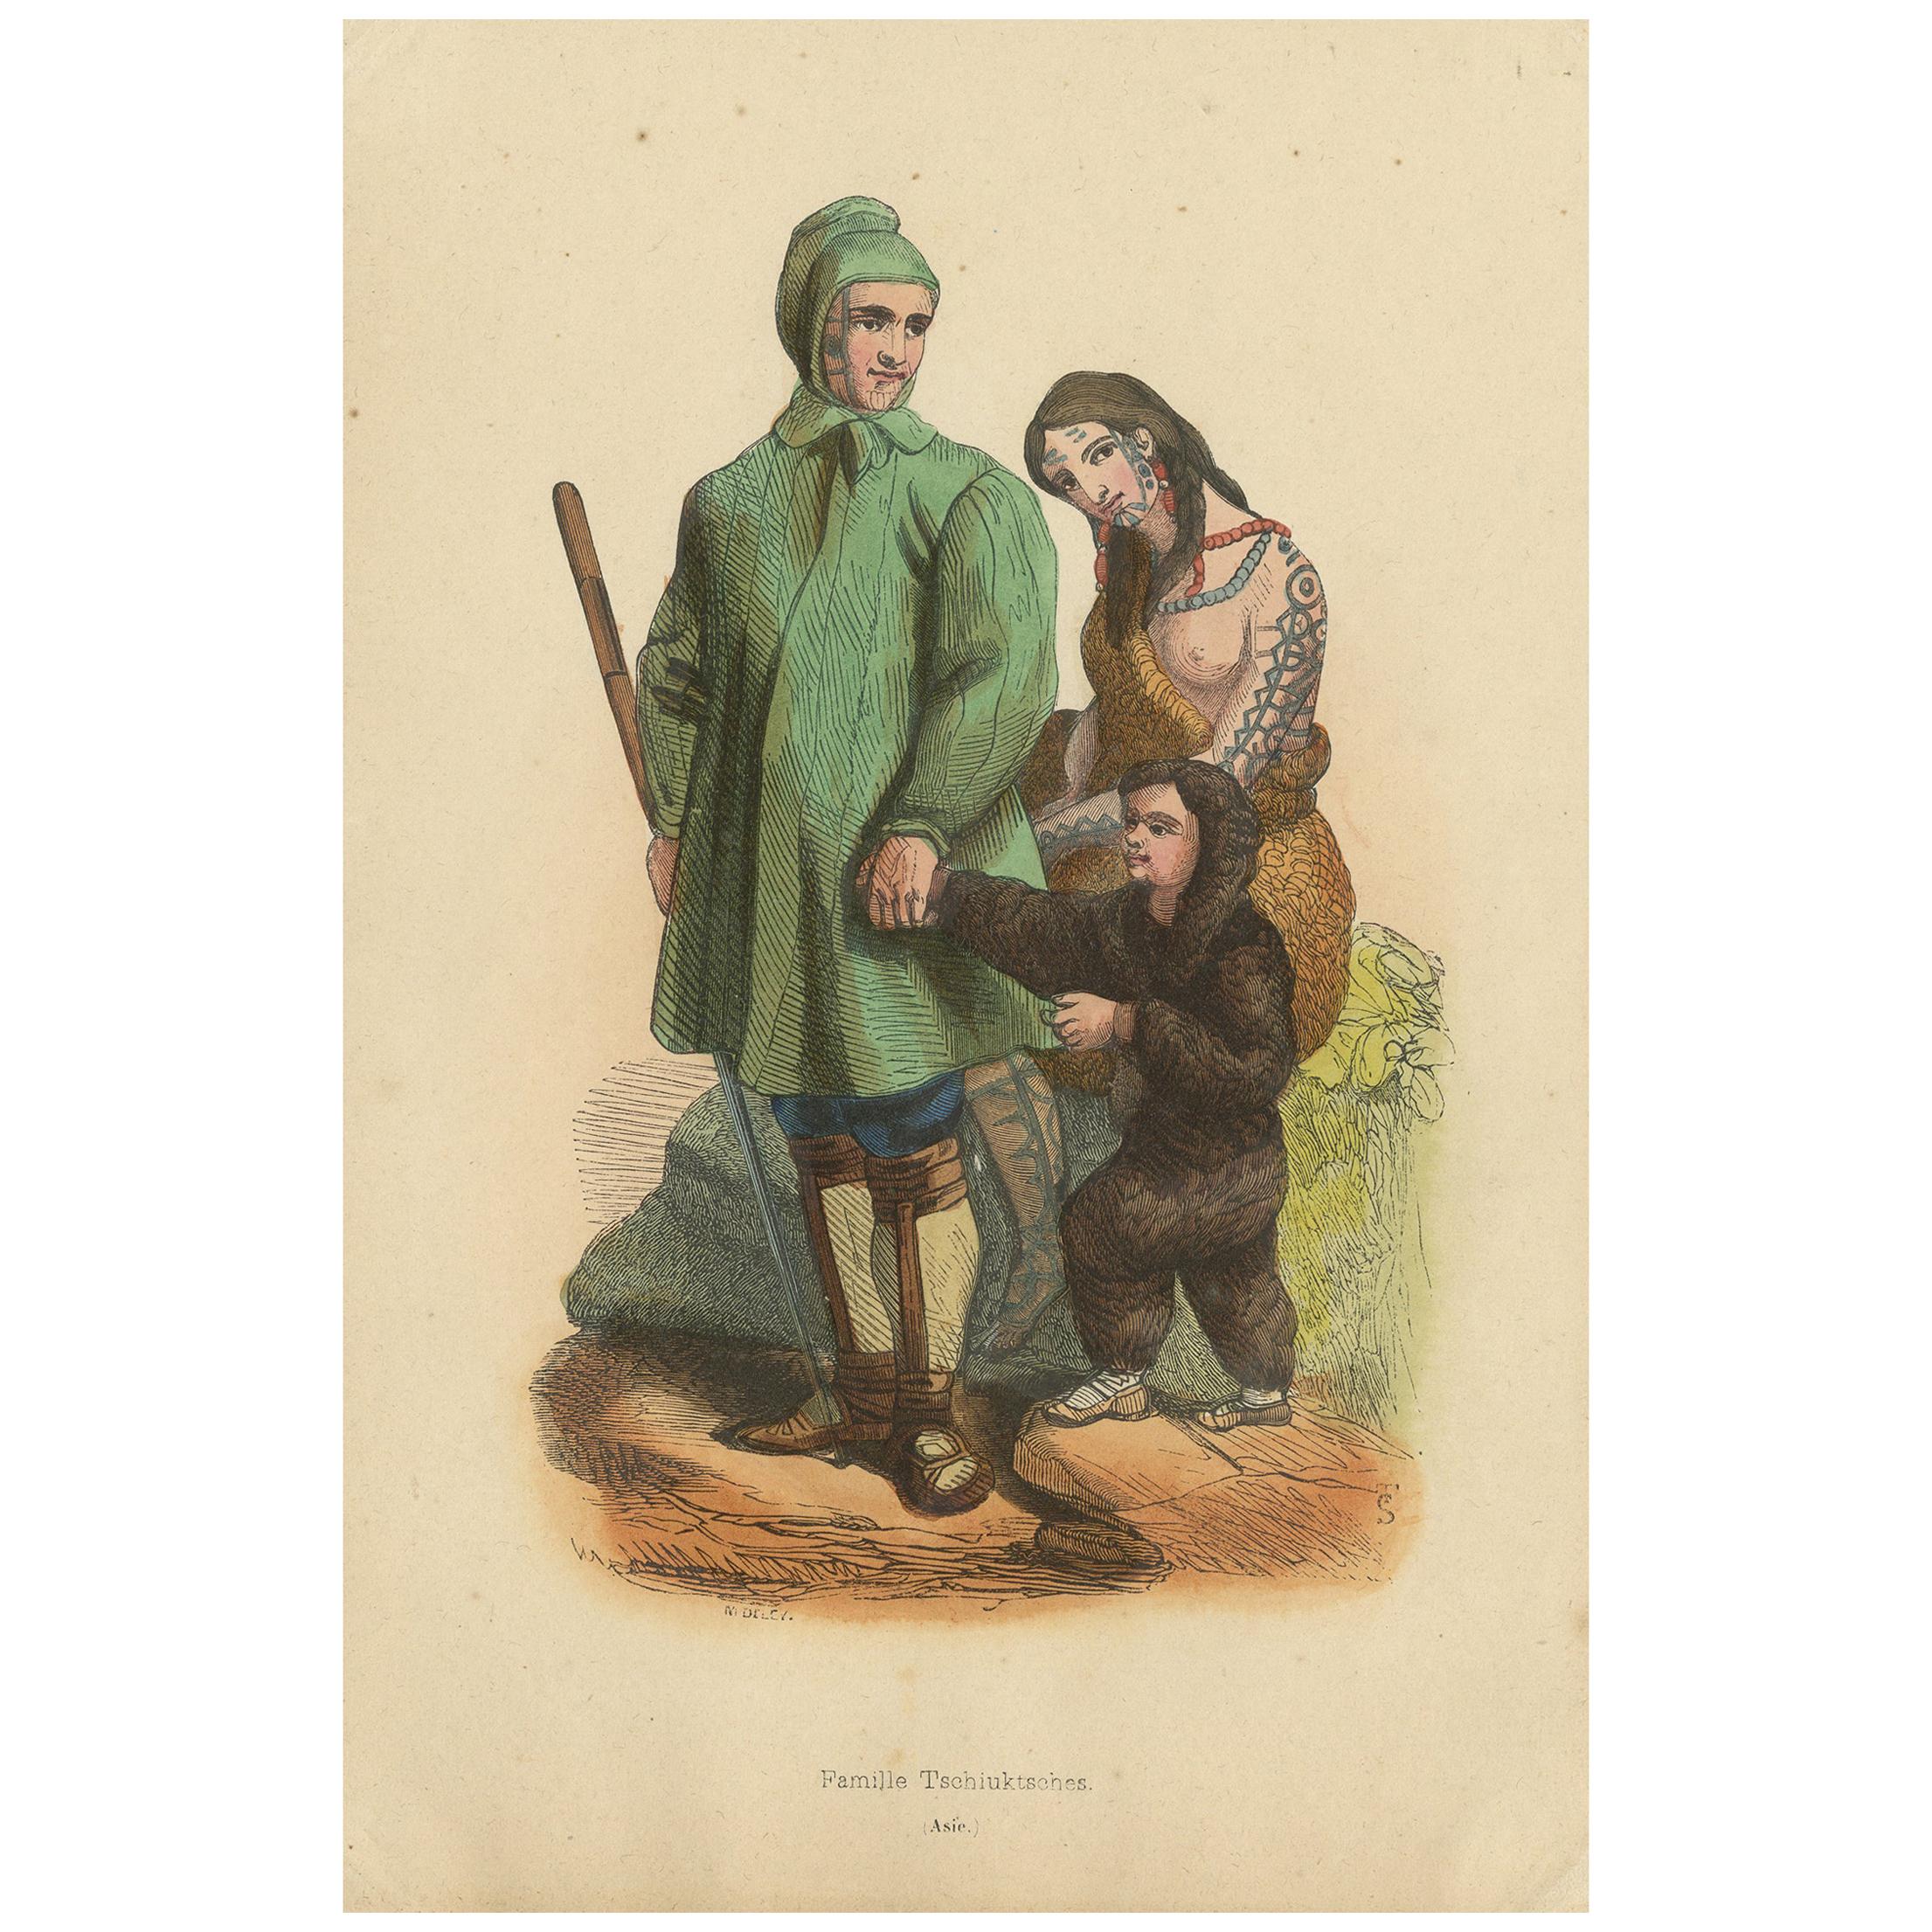 Antique Costume Print of Chuckchi People by Wahlen, 1843